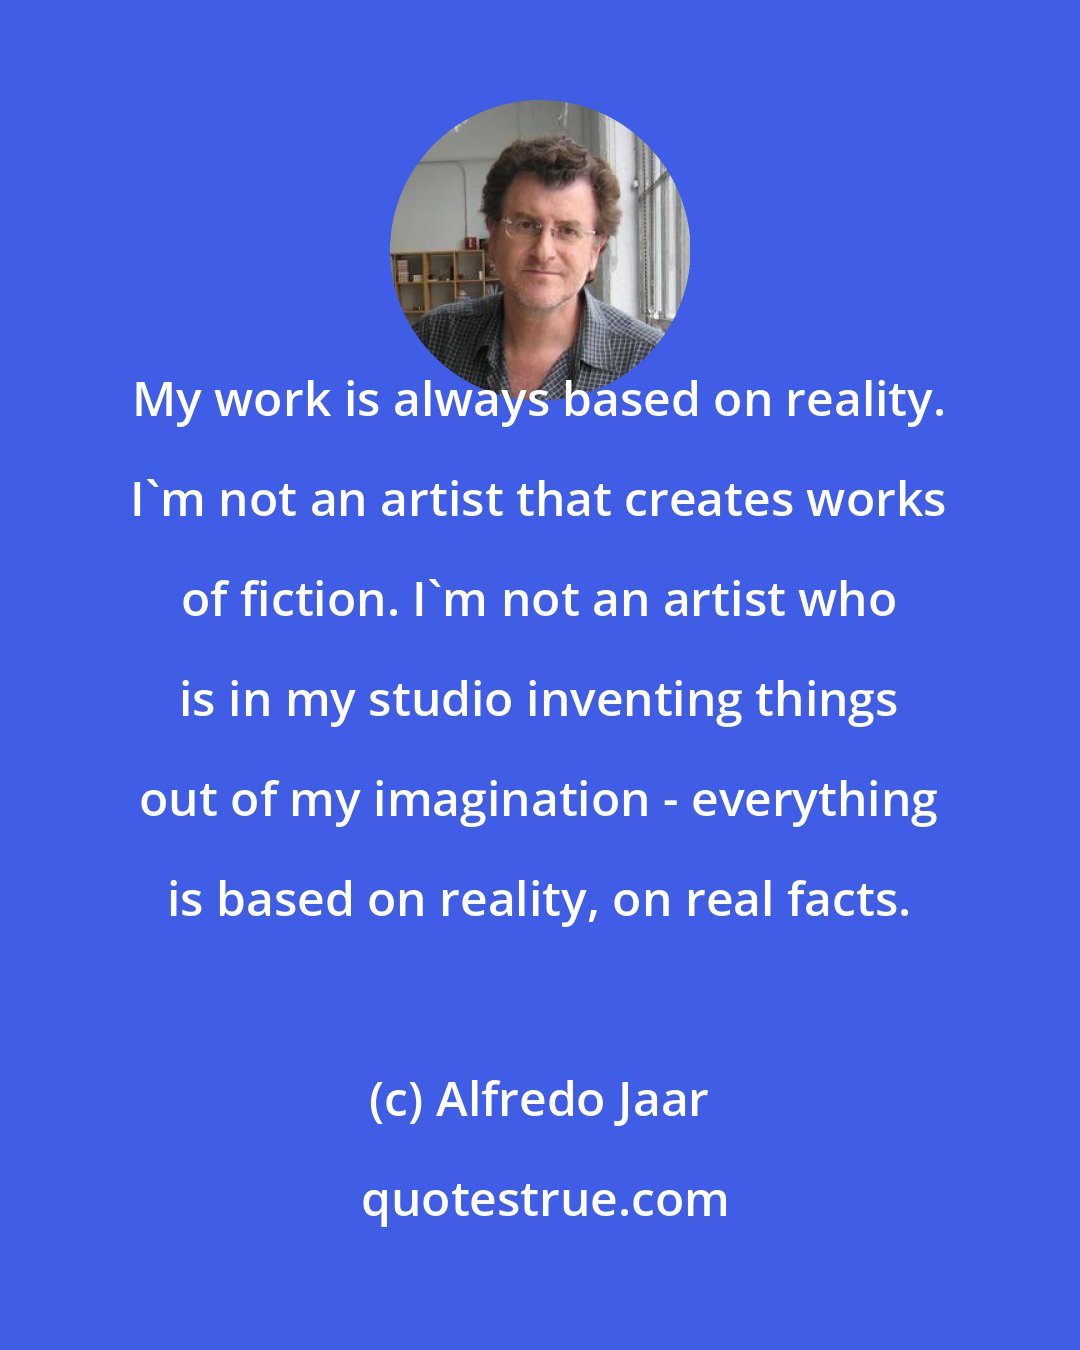 Alfredo Jaar: My work is always based on reality. I'm not an artist that creates works of fiction. I'm not an artist who is in my studio inventing things out of my imagination - everything is based on reality, on real facts.